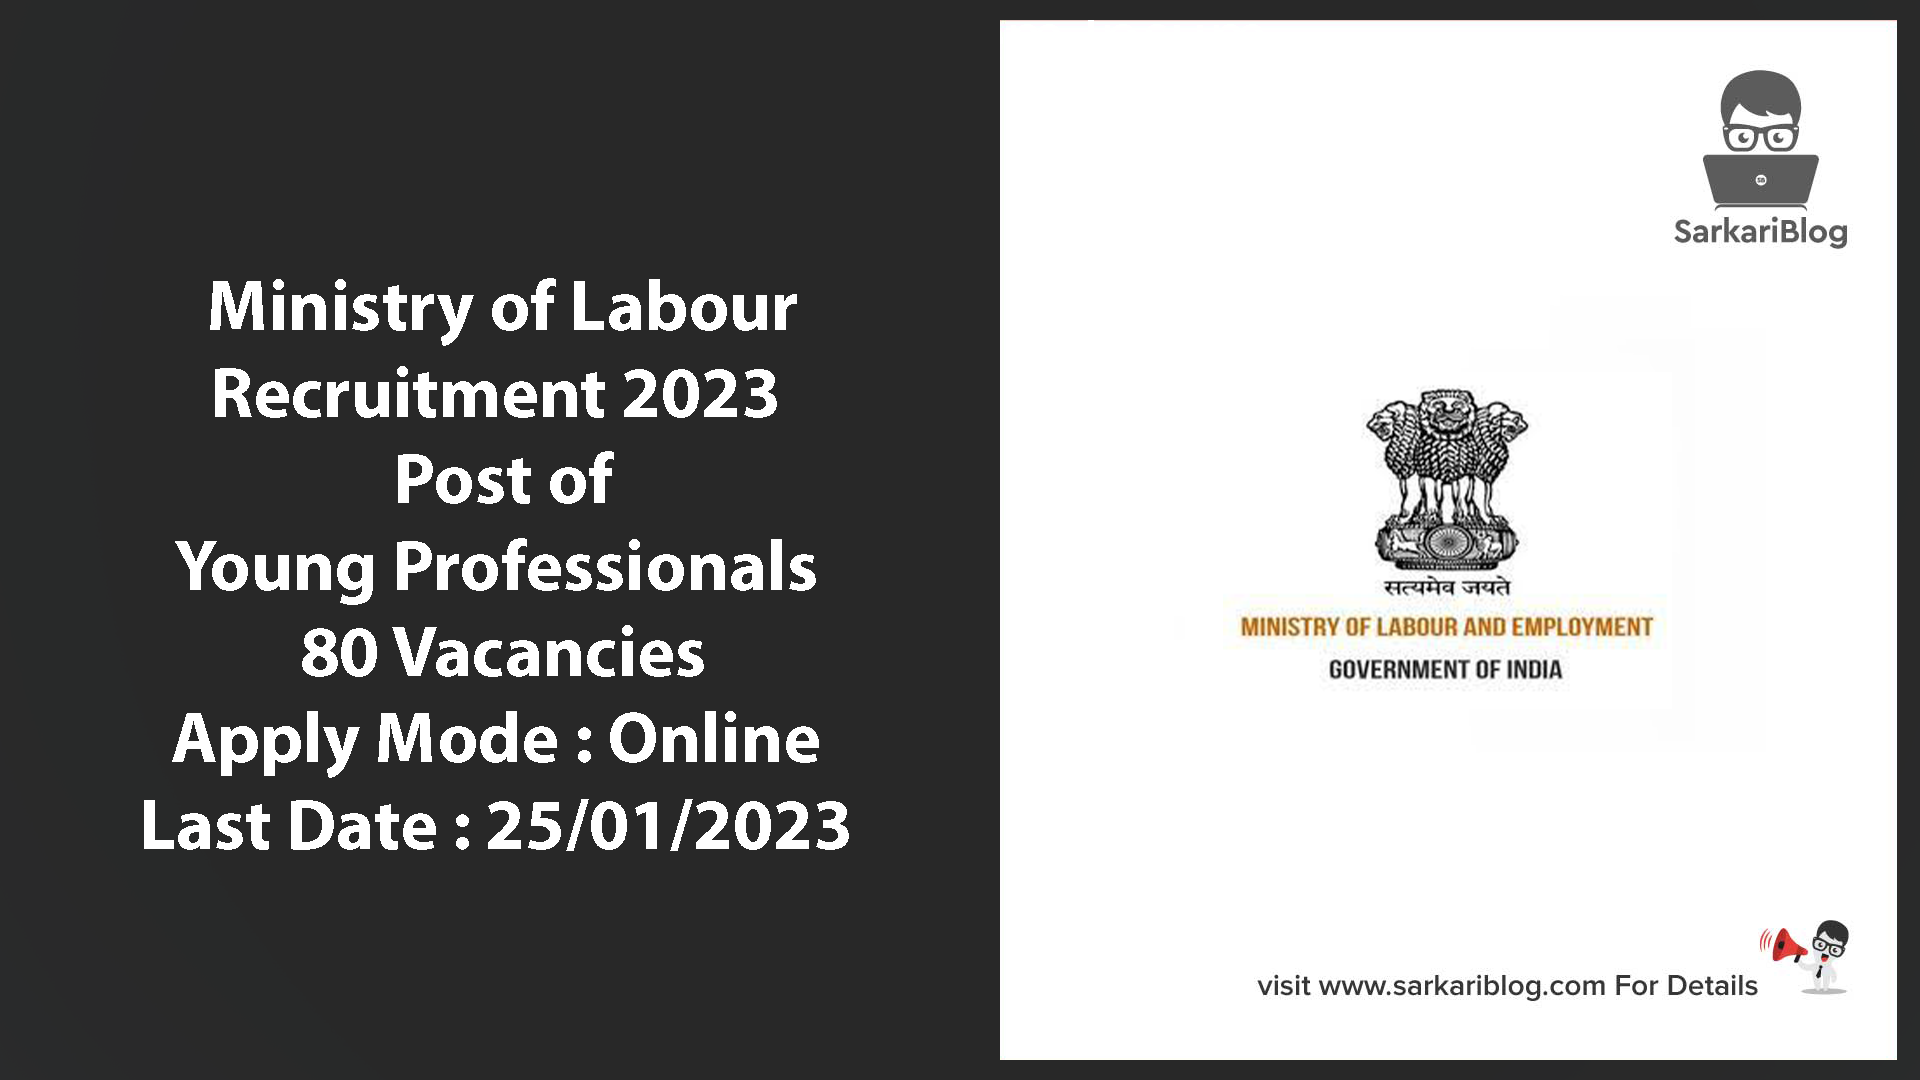 Ministry of Labour Recruitment 2023